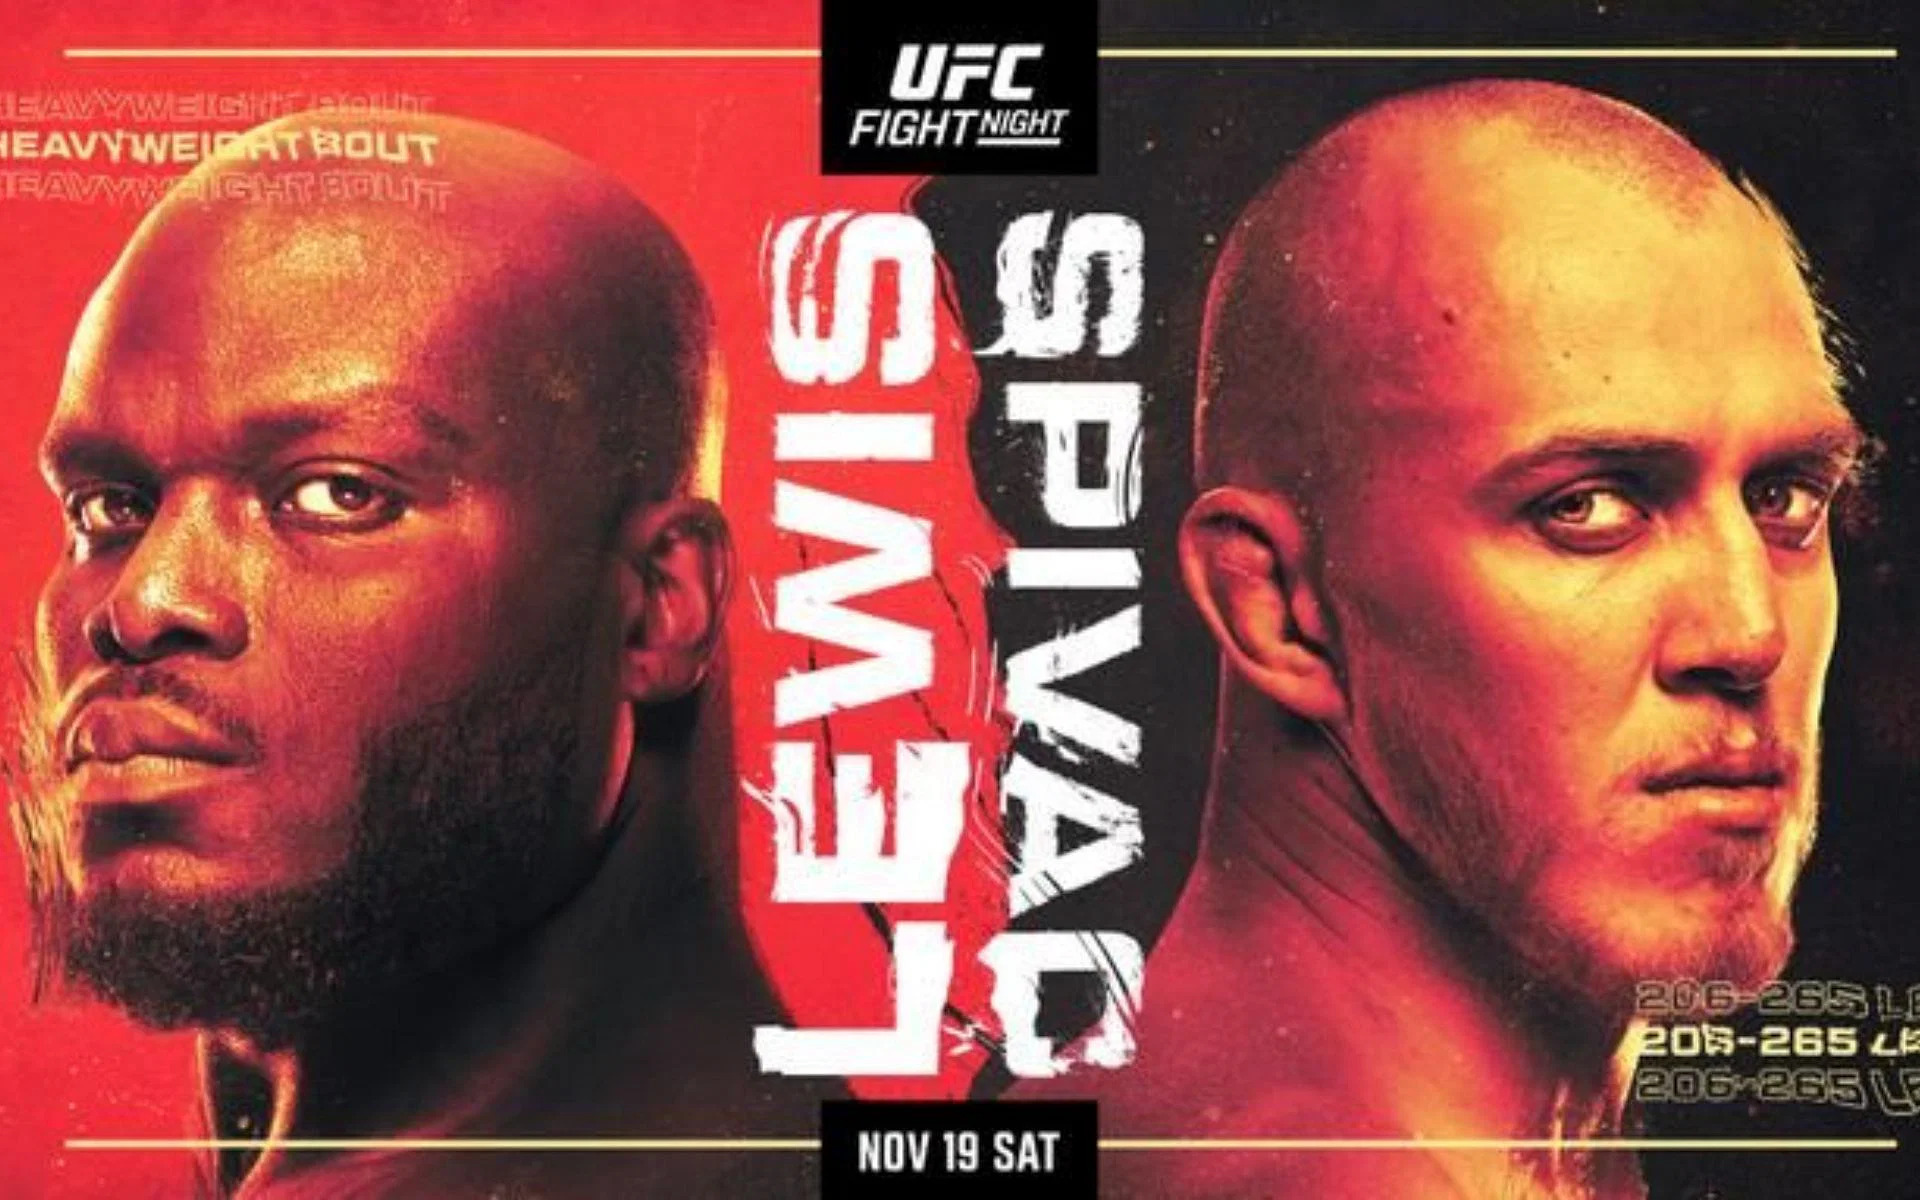 UFC Fight Night India Derrick Lewis vs Sergey Spivac How to watch Lewis vs Spivac in India live?